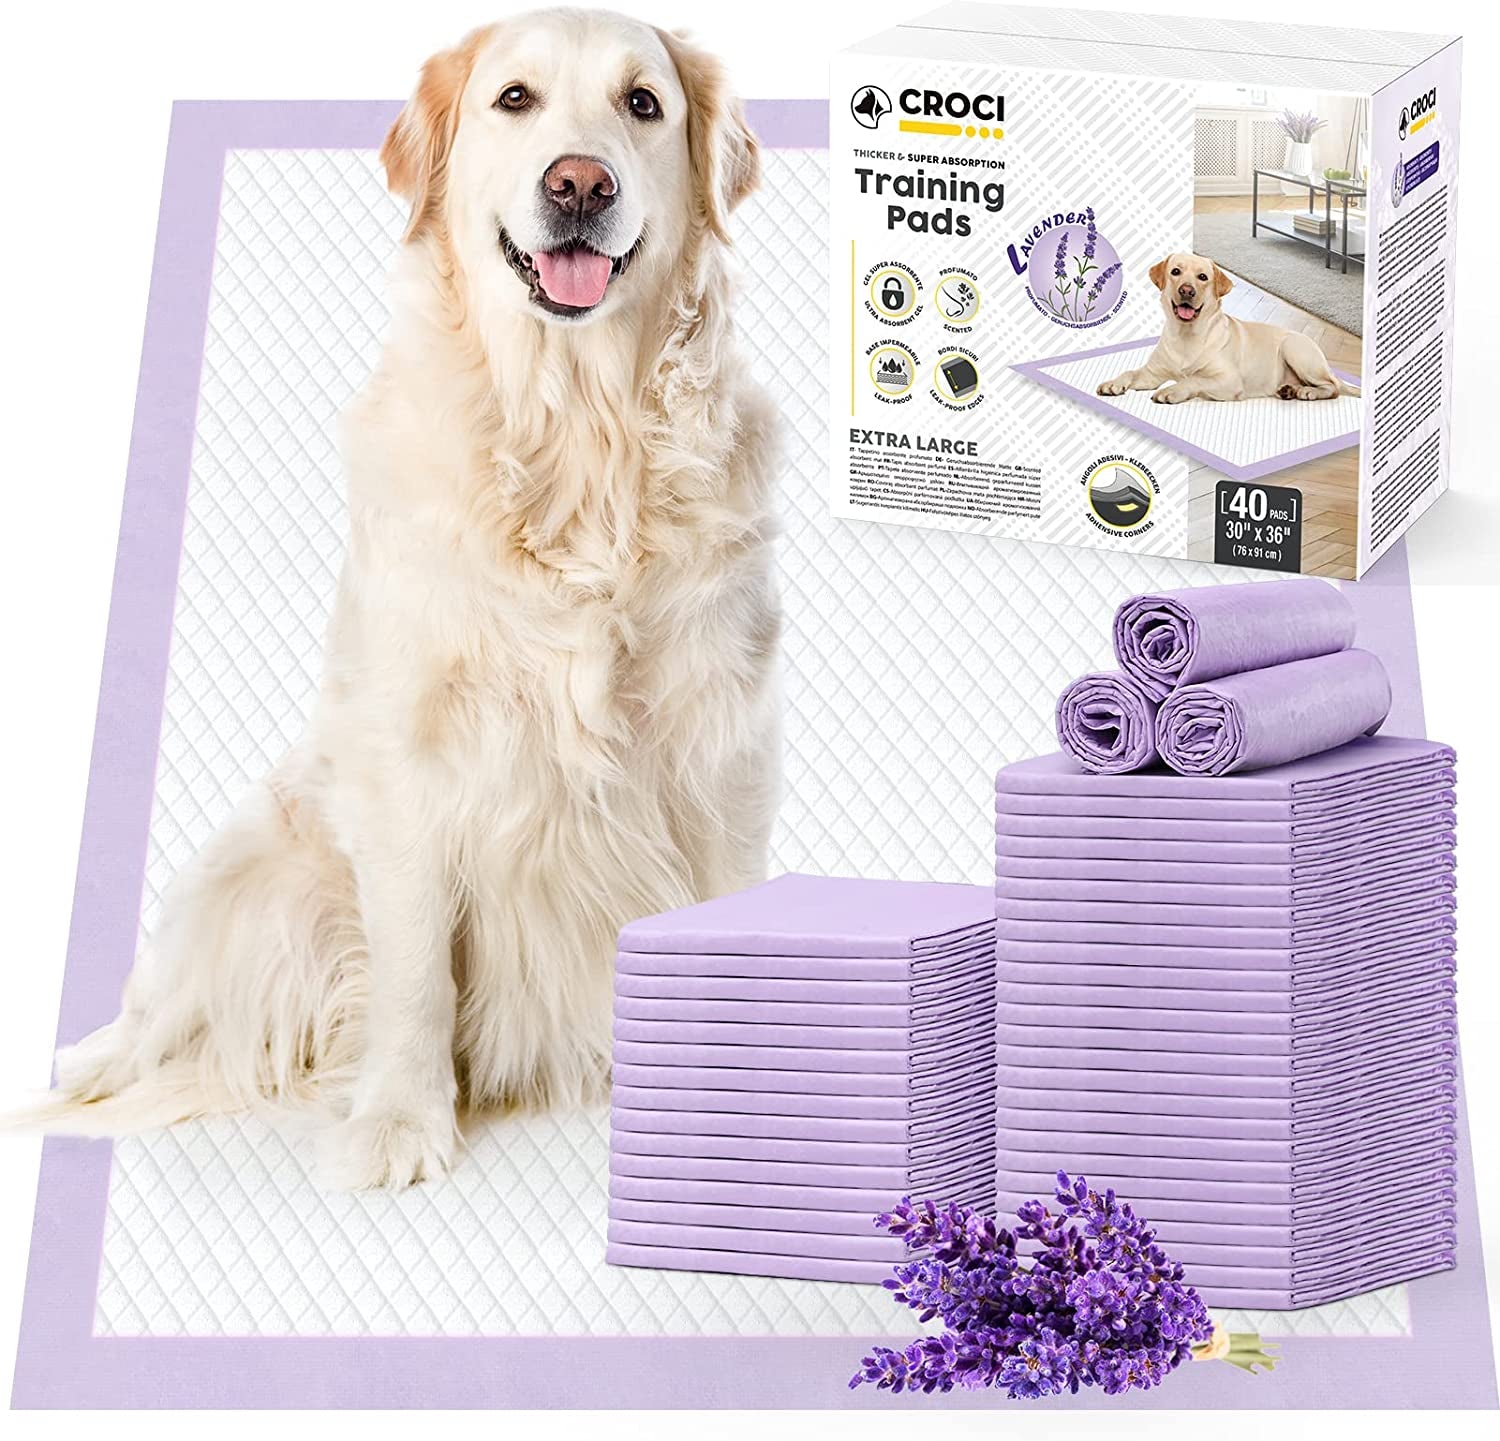 Extra Large Lavender Scented Puppy Pads - 30X36In, Highly Absorbent with Odor Elimination, Suitable for Dogs, Disposable (40 Counts)